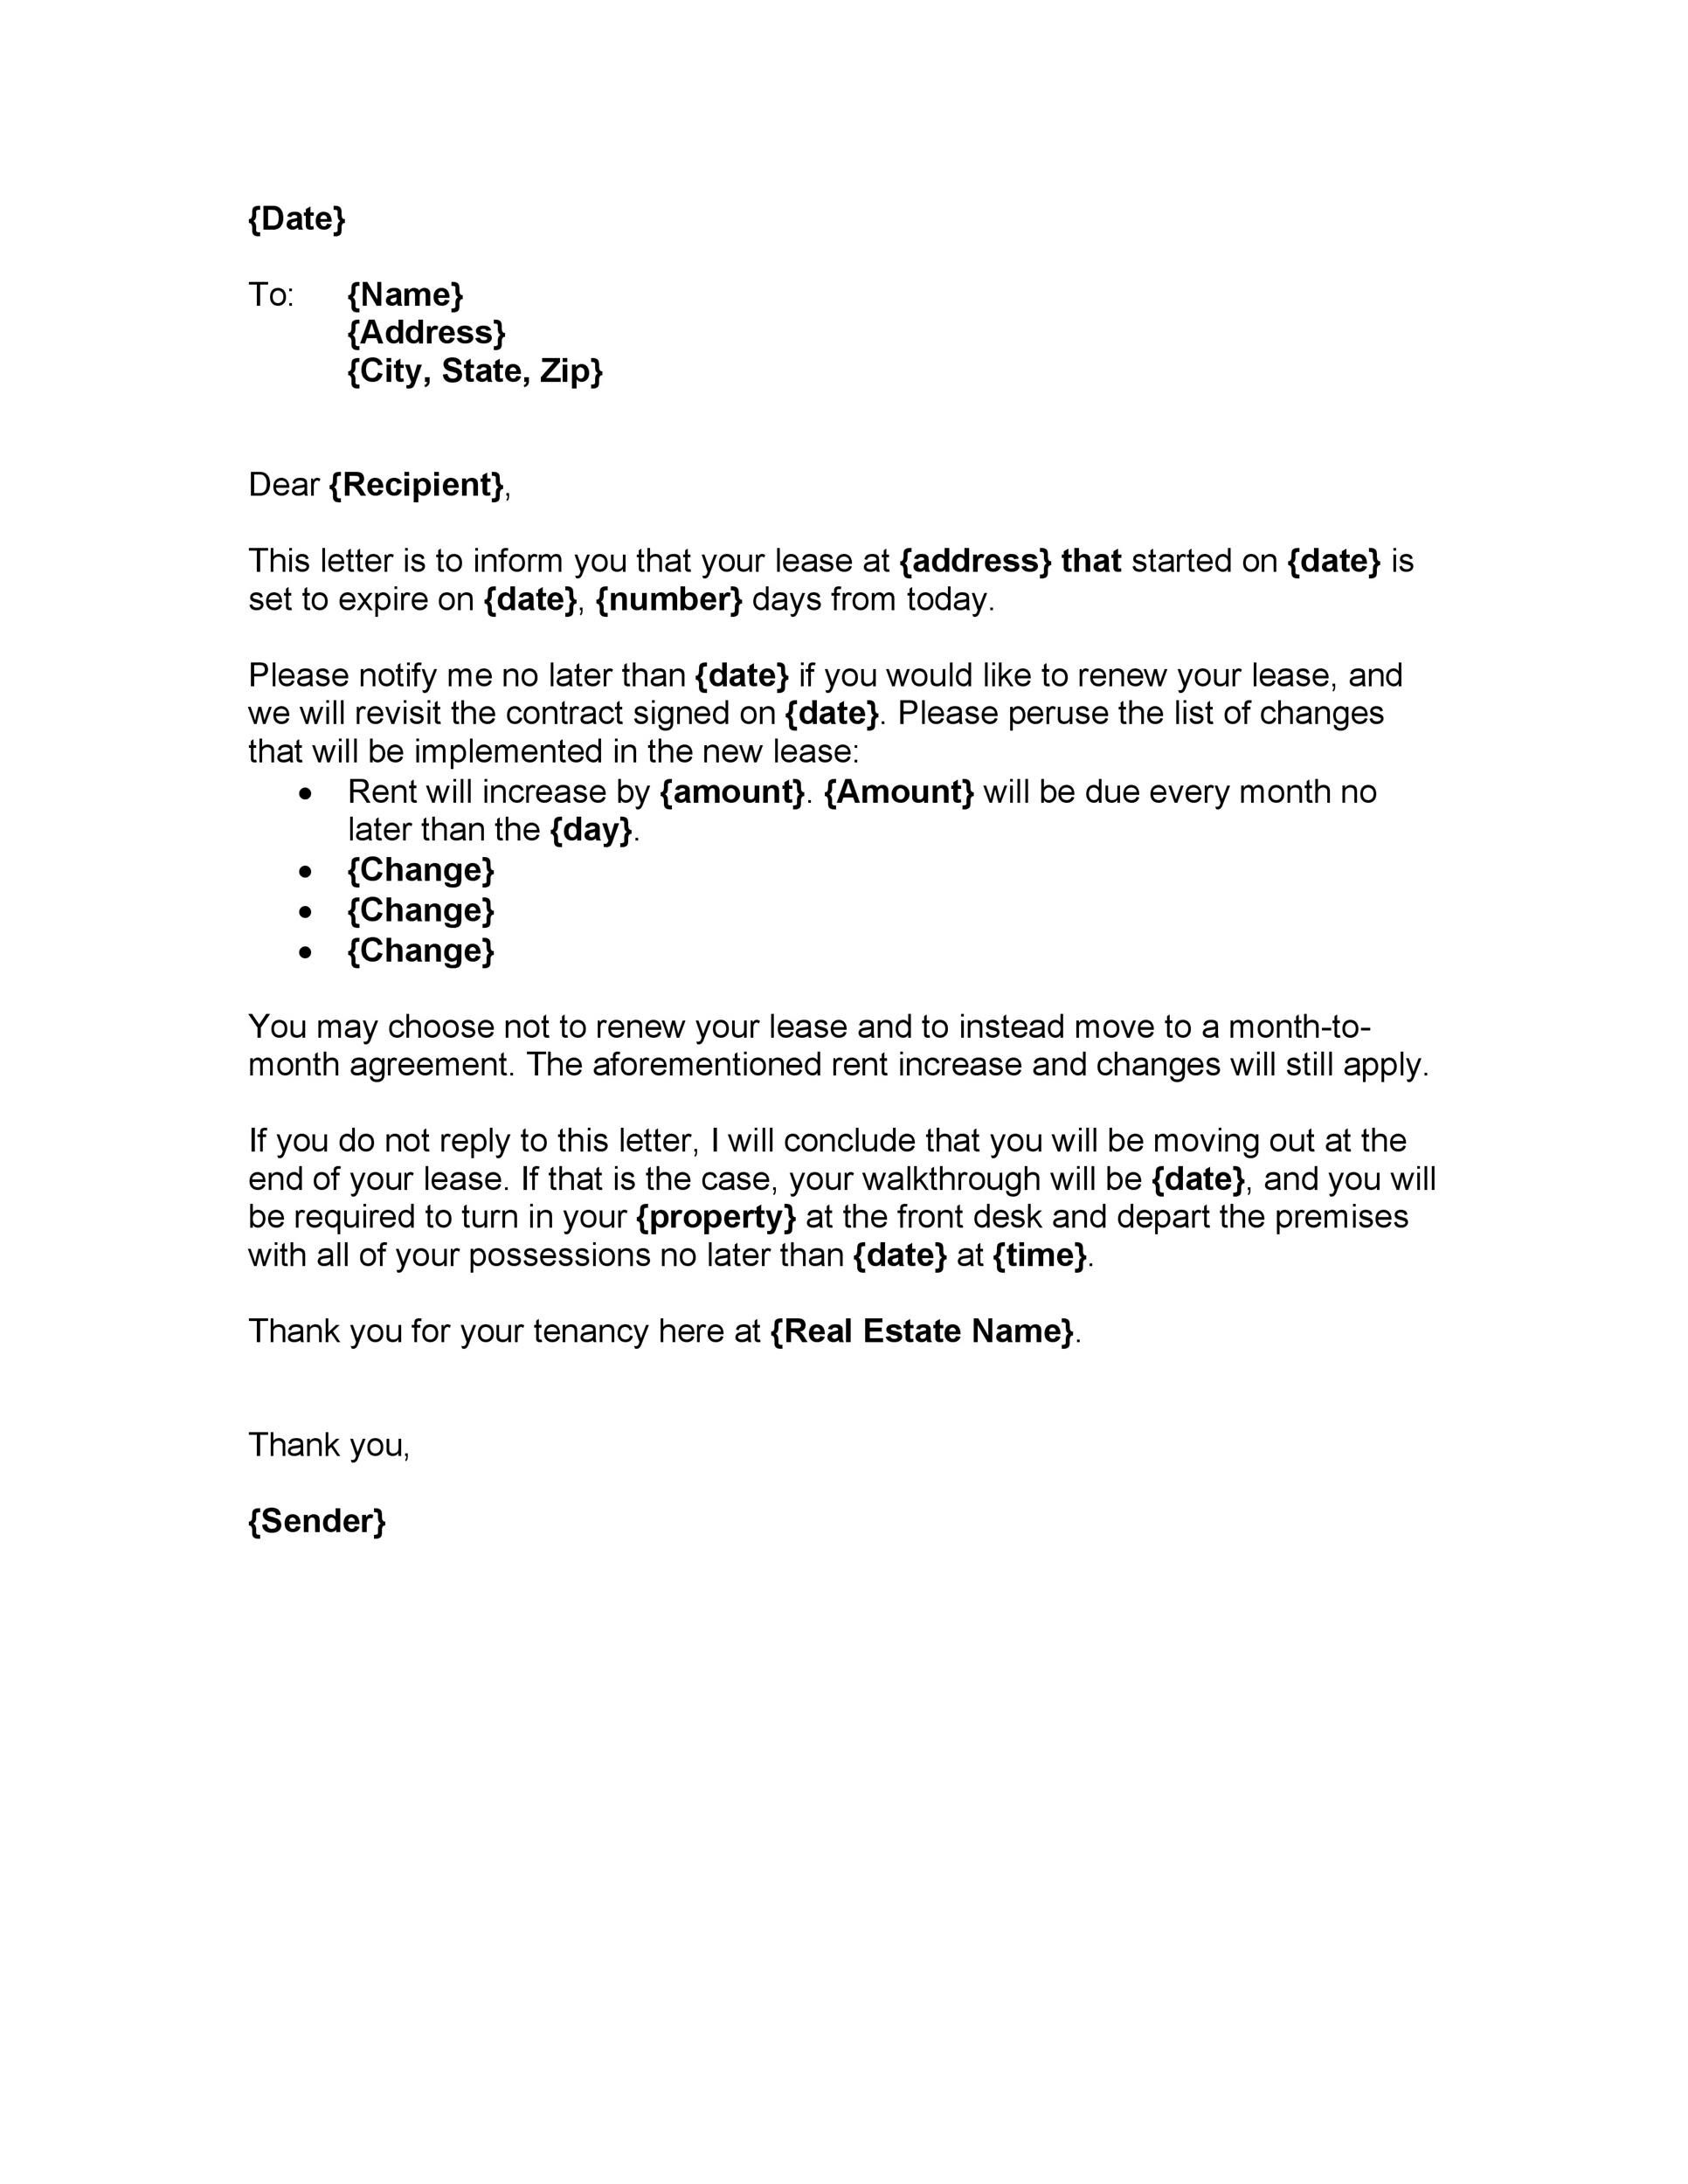 tenant-not-renewing-lease-letter-for-your-needs-letter-template-collection